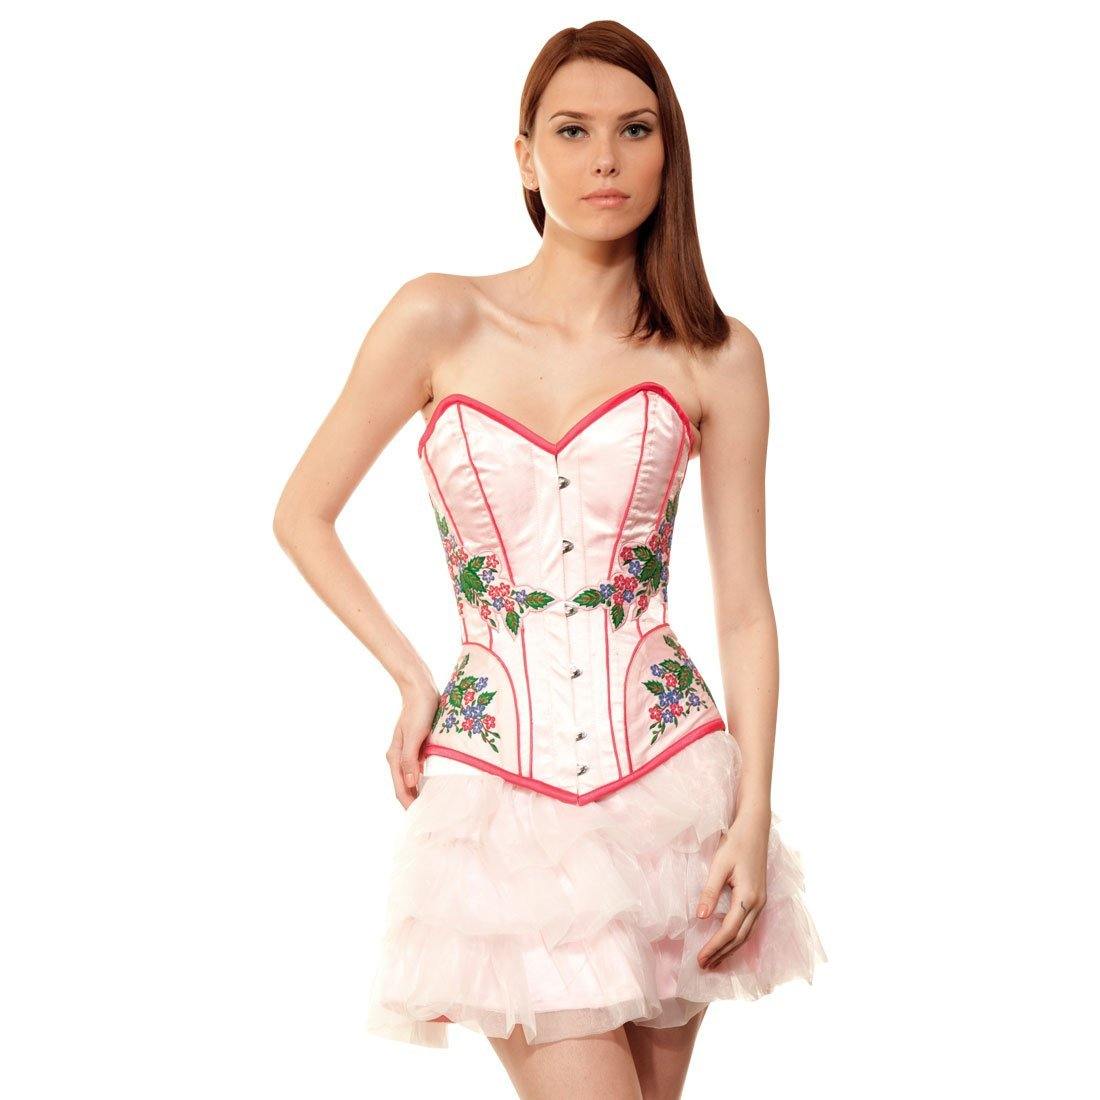 Waathiq Couture Authentic Steel Boned Long Lined Overbust Corset Dress - Corset Revolution